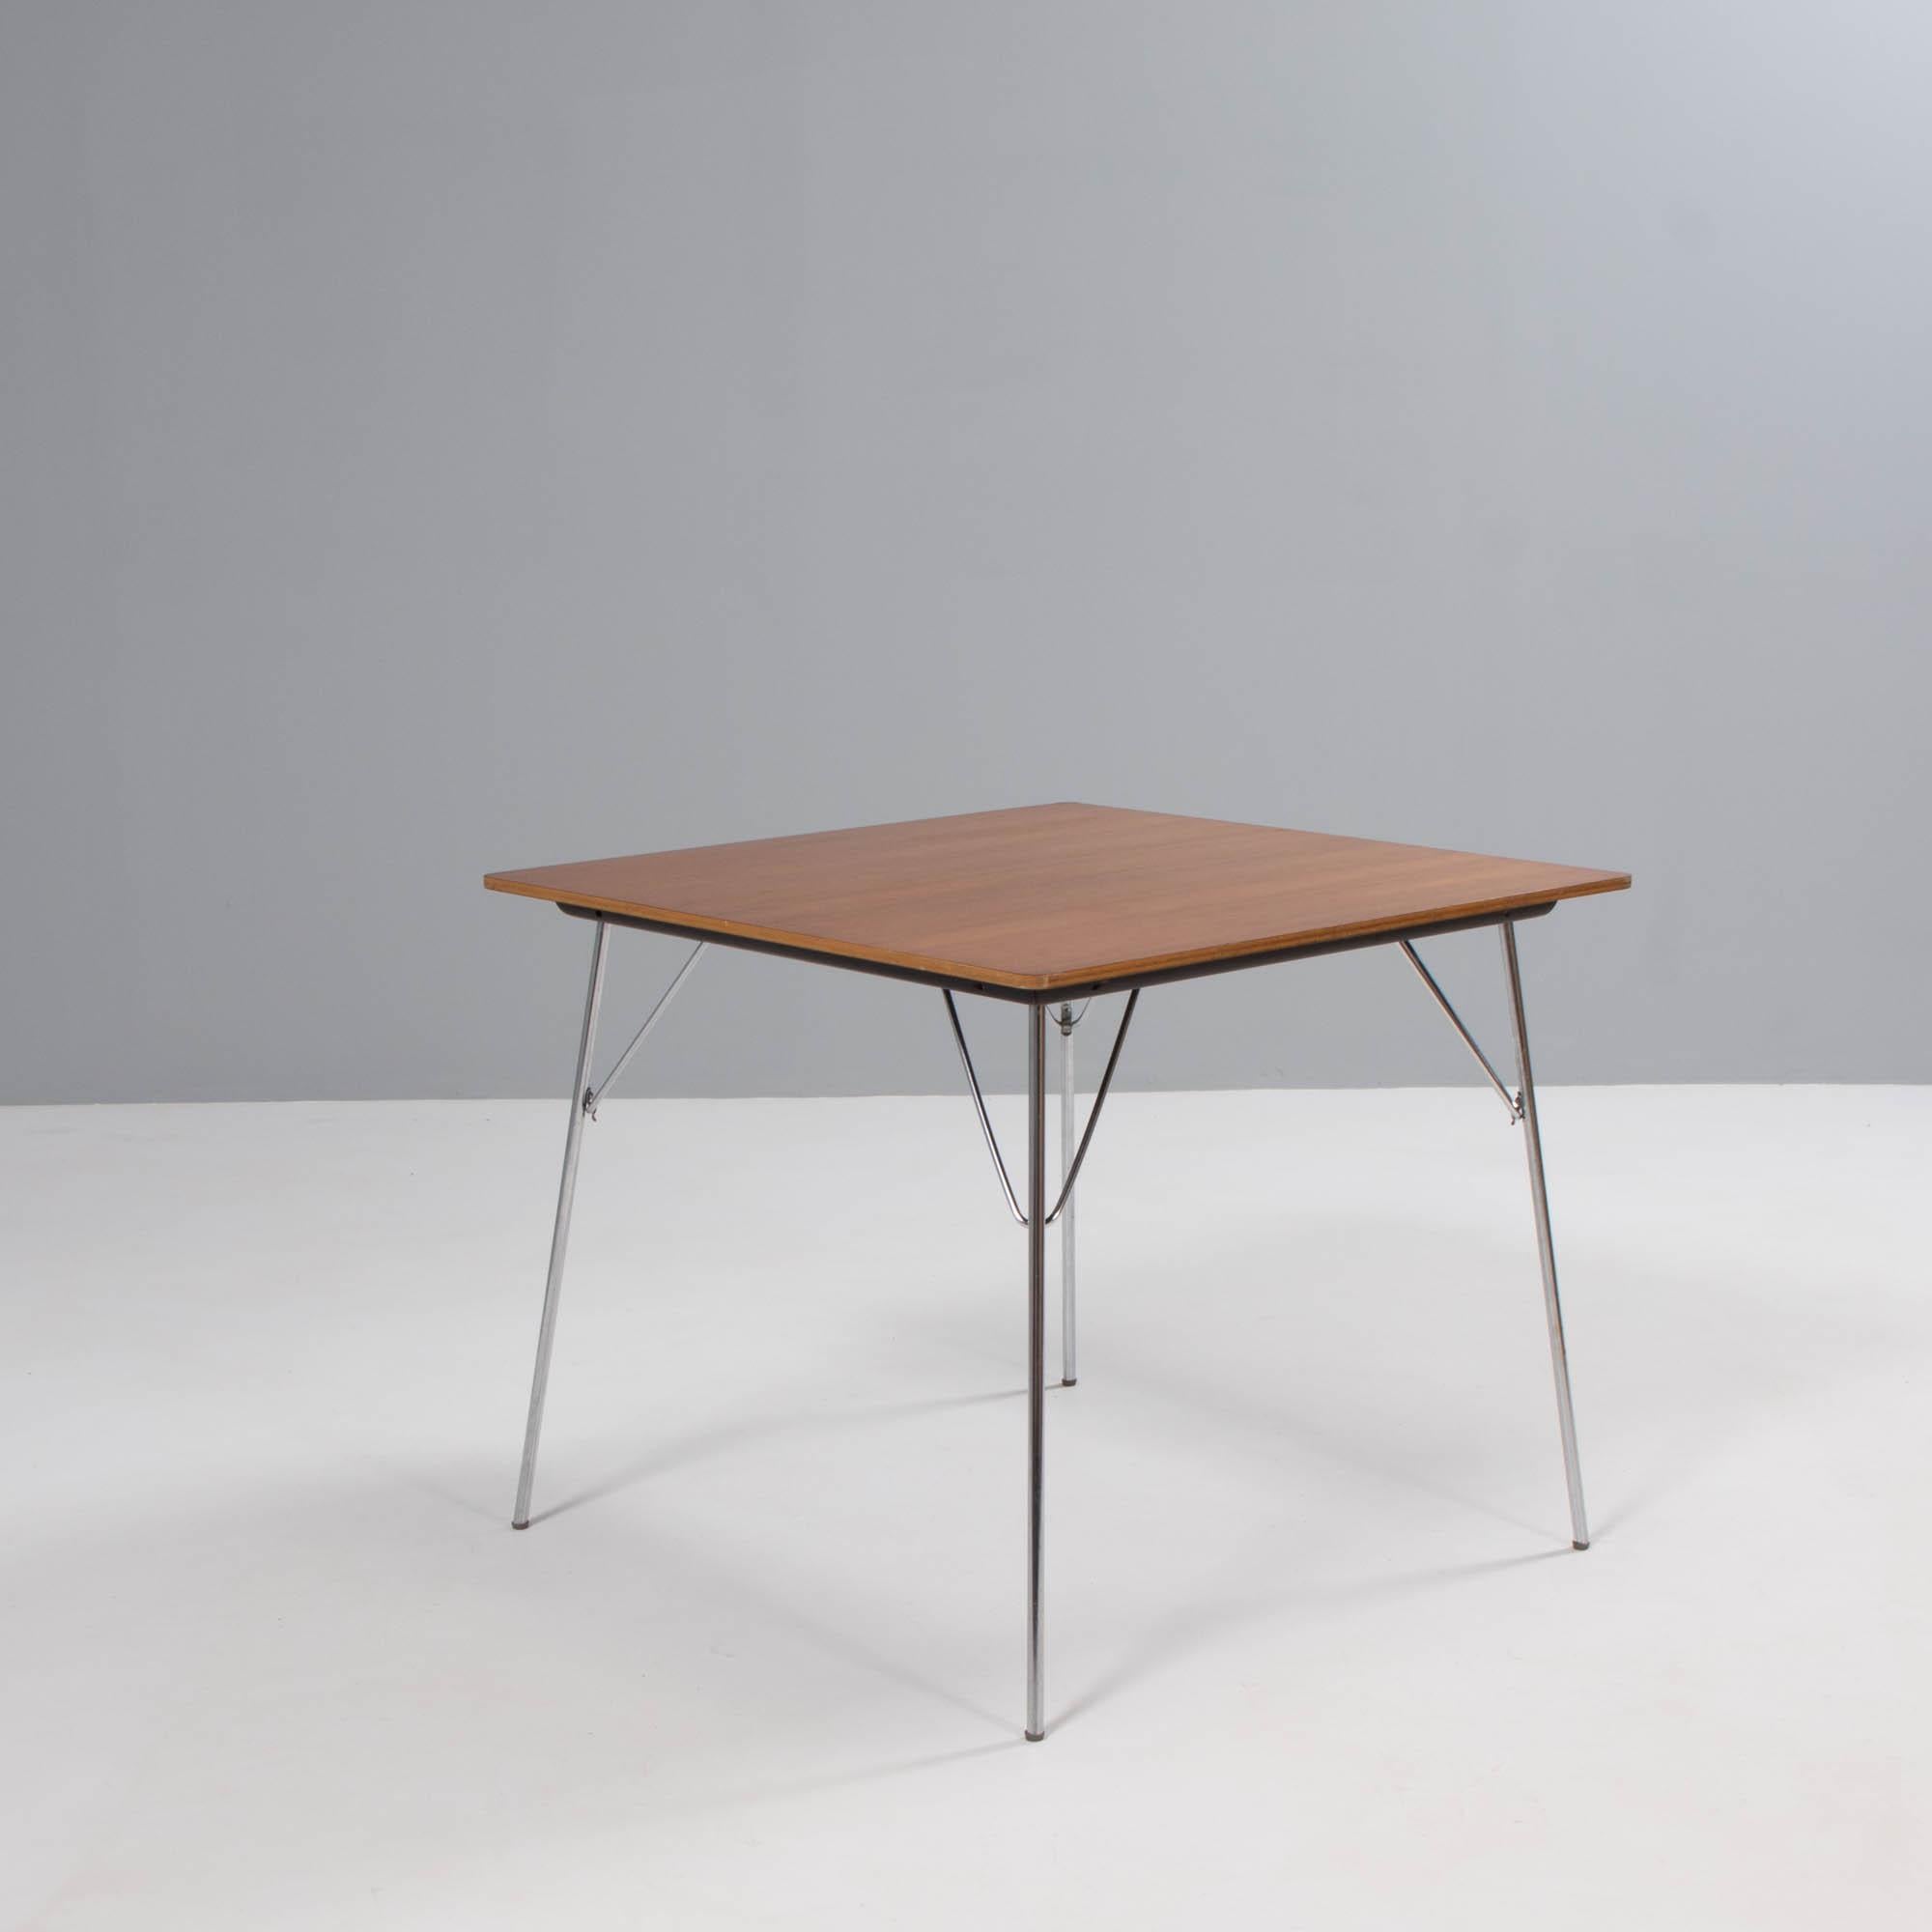 American Charles & Ray Eames for Herman Miller DTM-2 Dining Table, 1950s